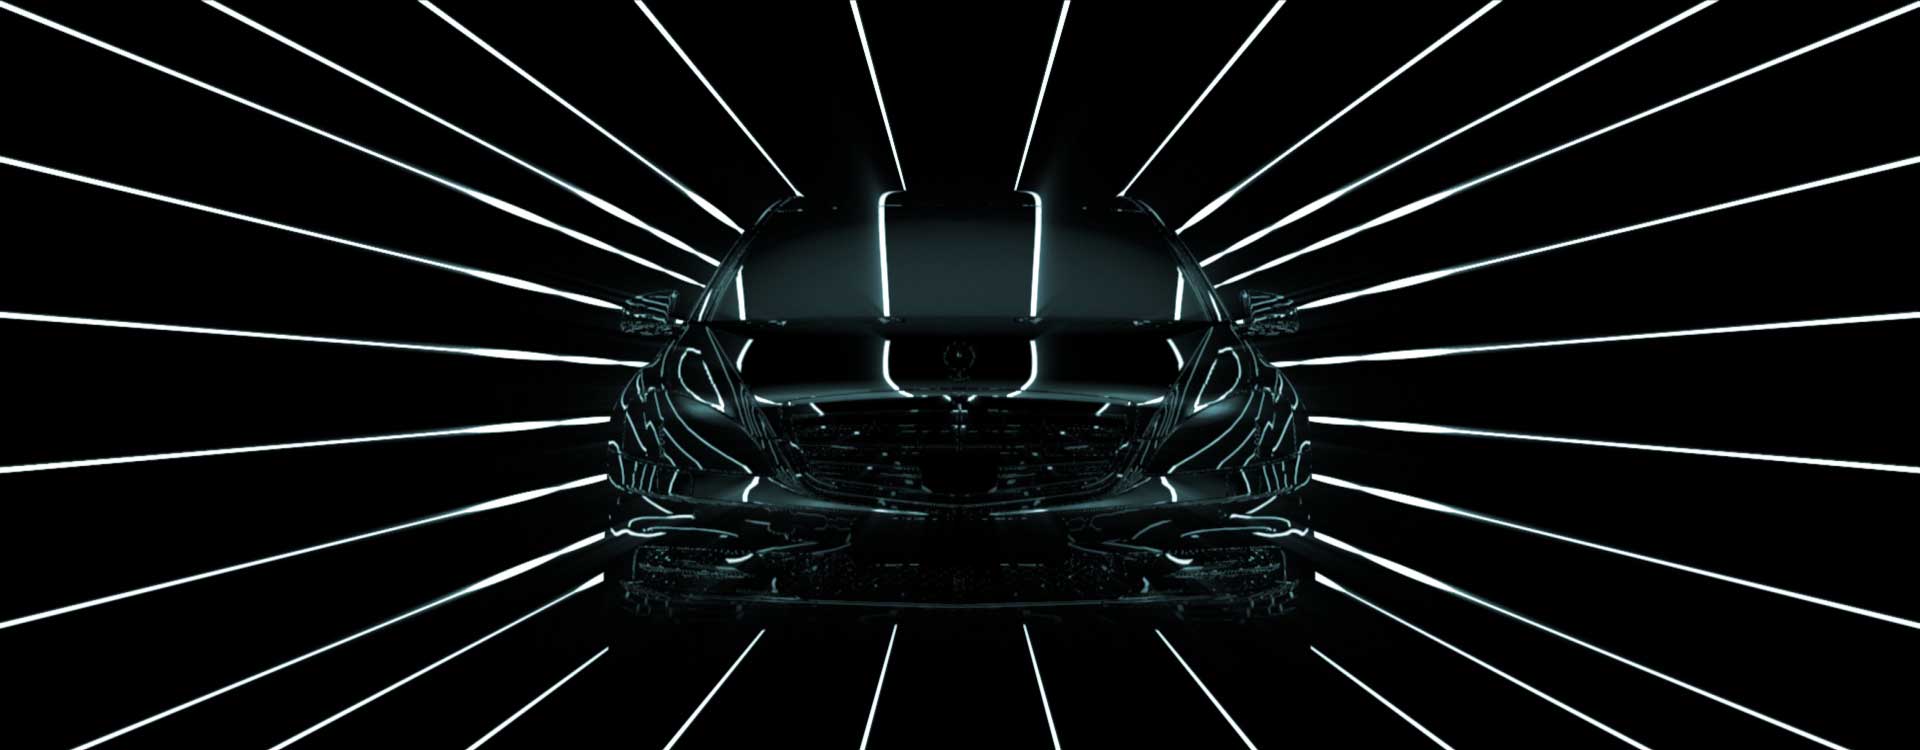 Car frontview. Still from Mercedes-Benz Commercial.